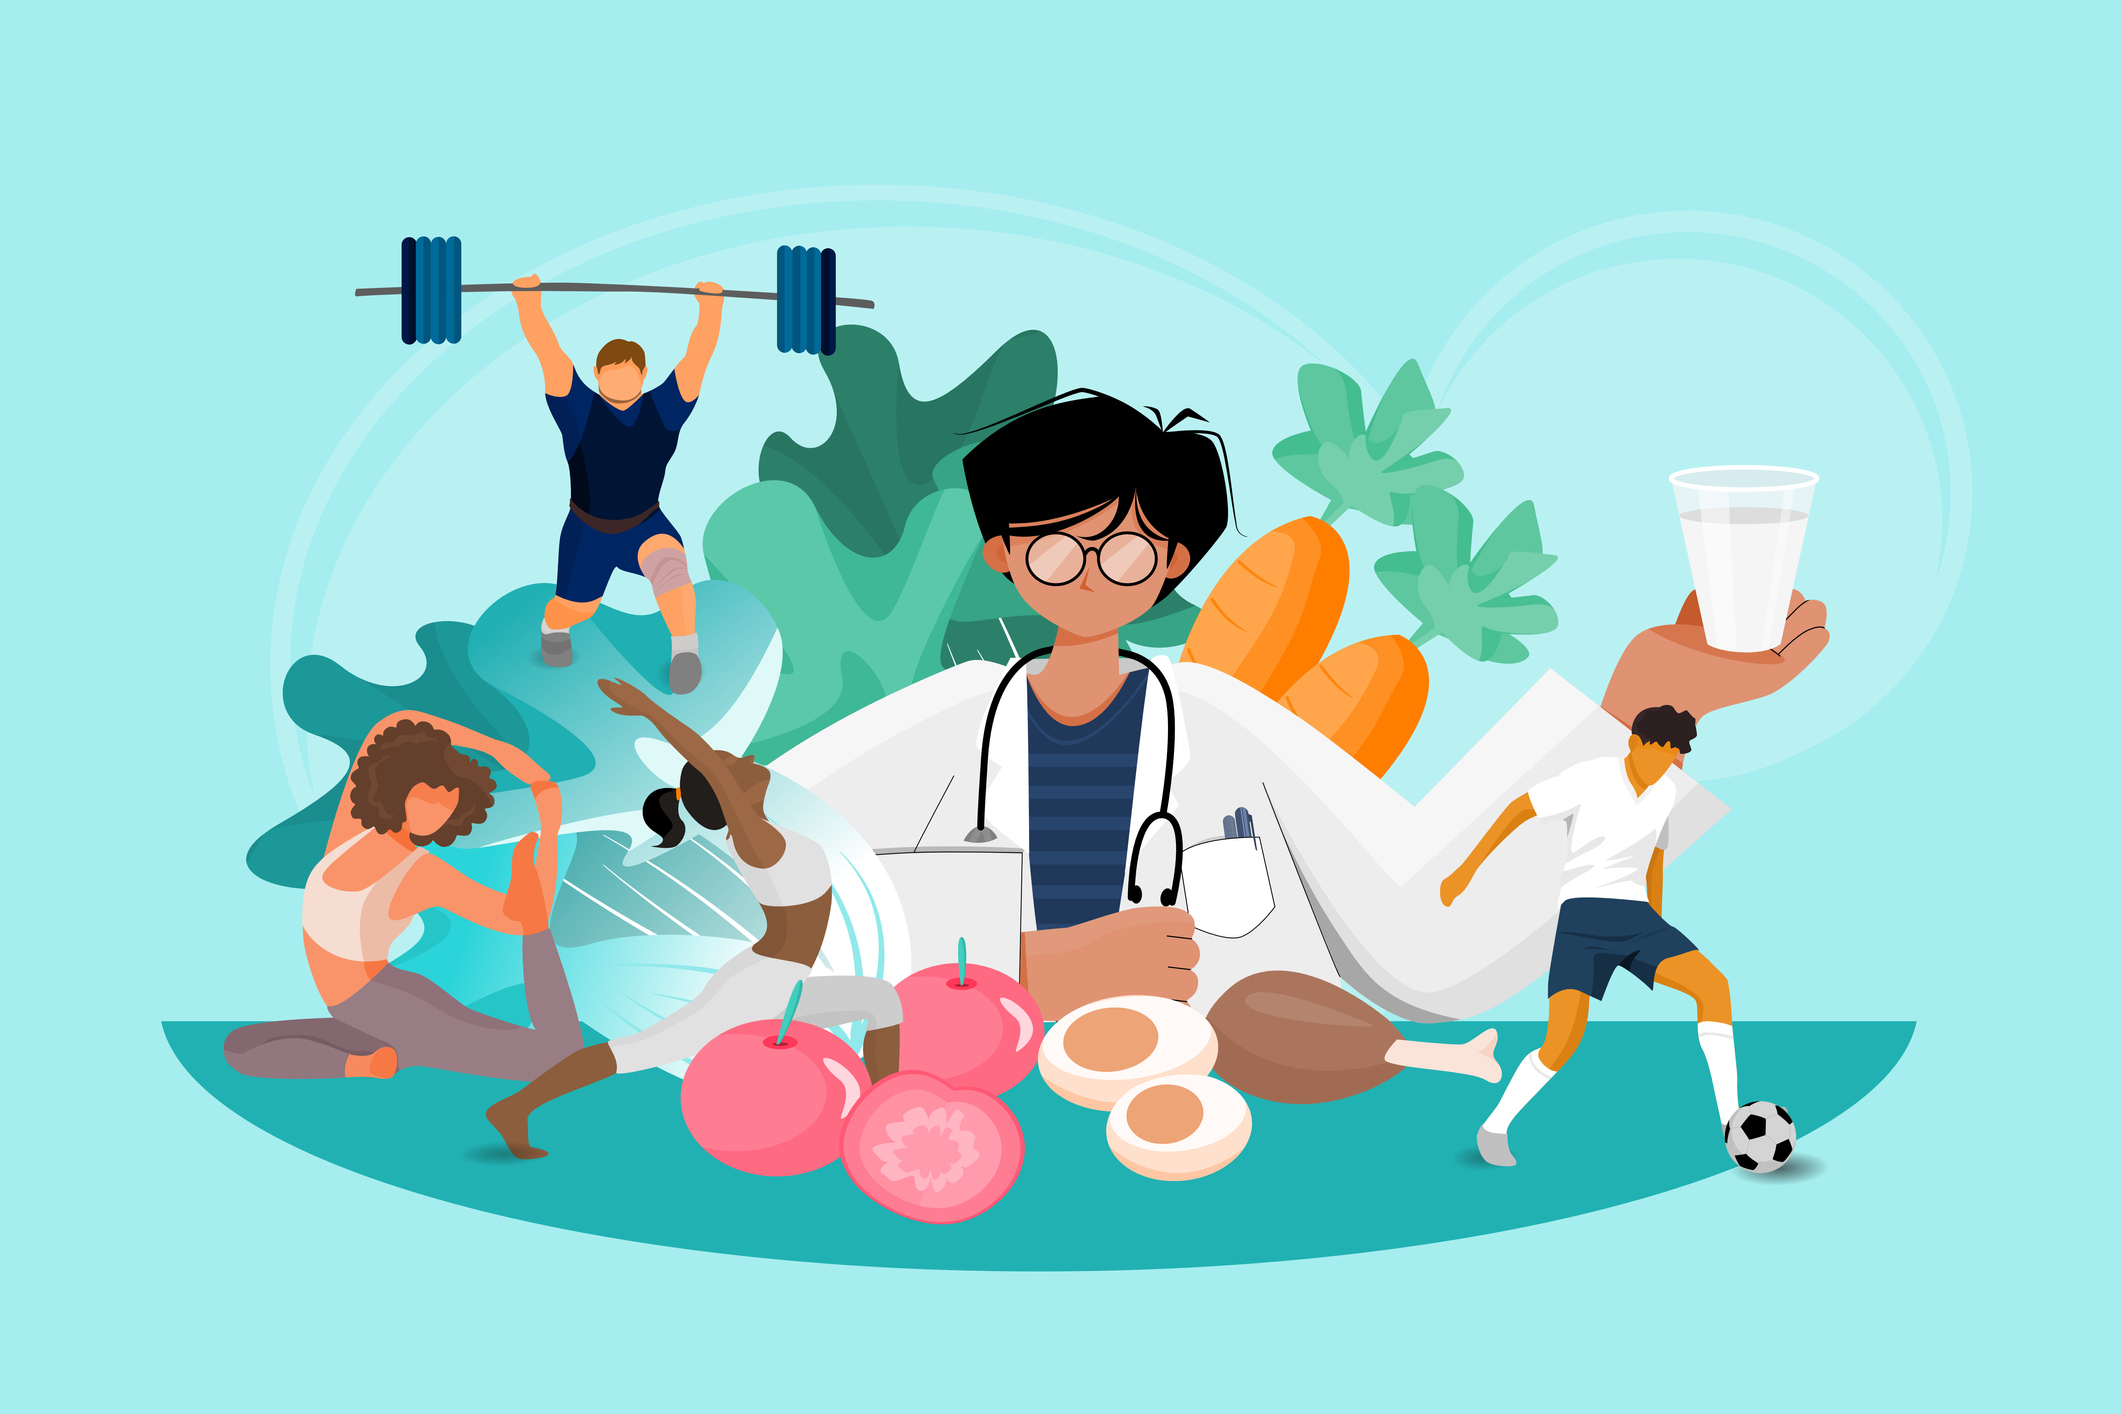 Healthcare and medicine illustration concept shows the doctor advising how to be a healthy person by referring exercise and eating good food regularly.